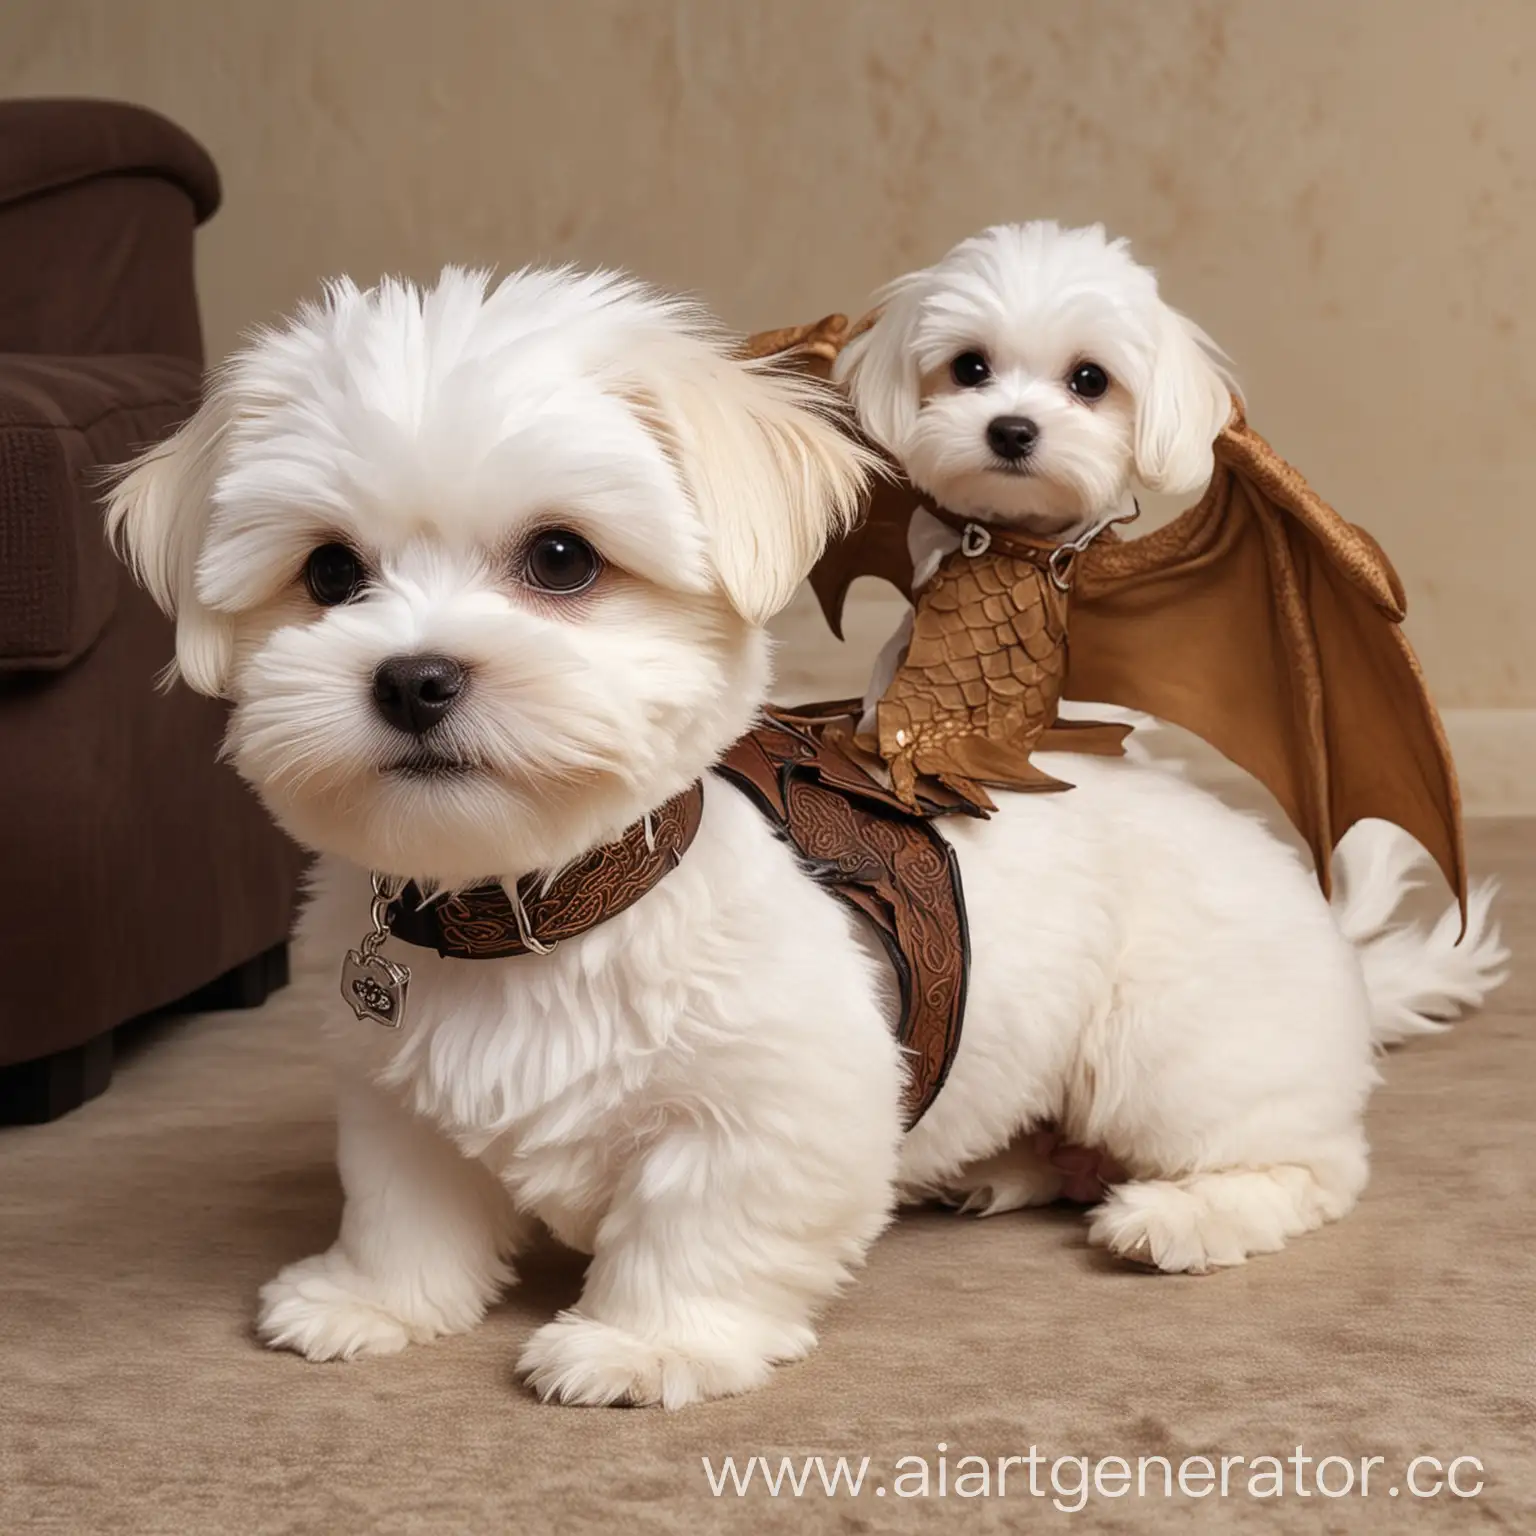 Dragon-and-Maltese-Brown-in-One-Mythical-Creature-with-Dual-Colors